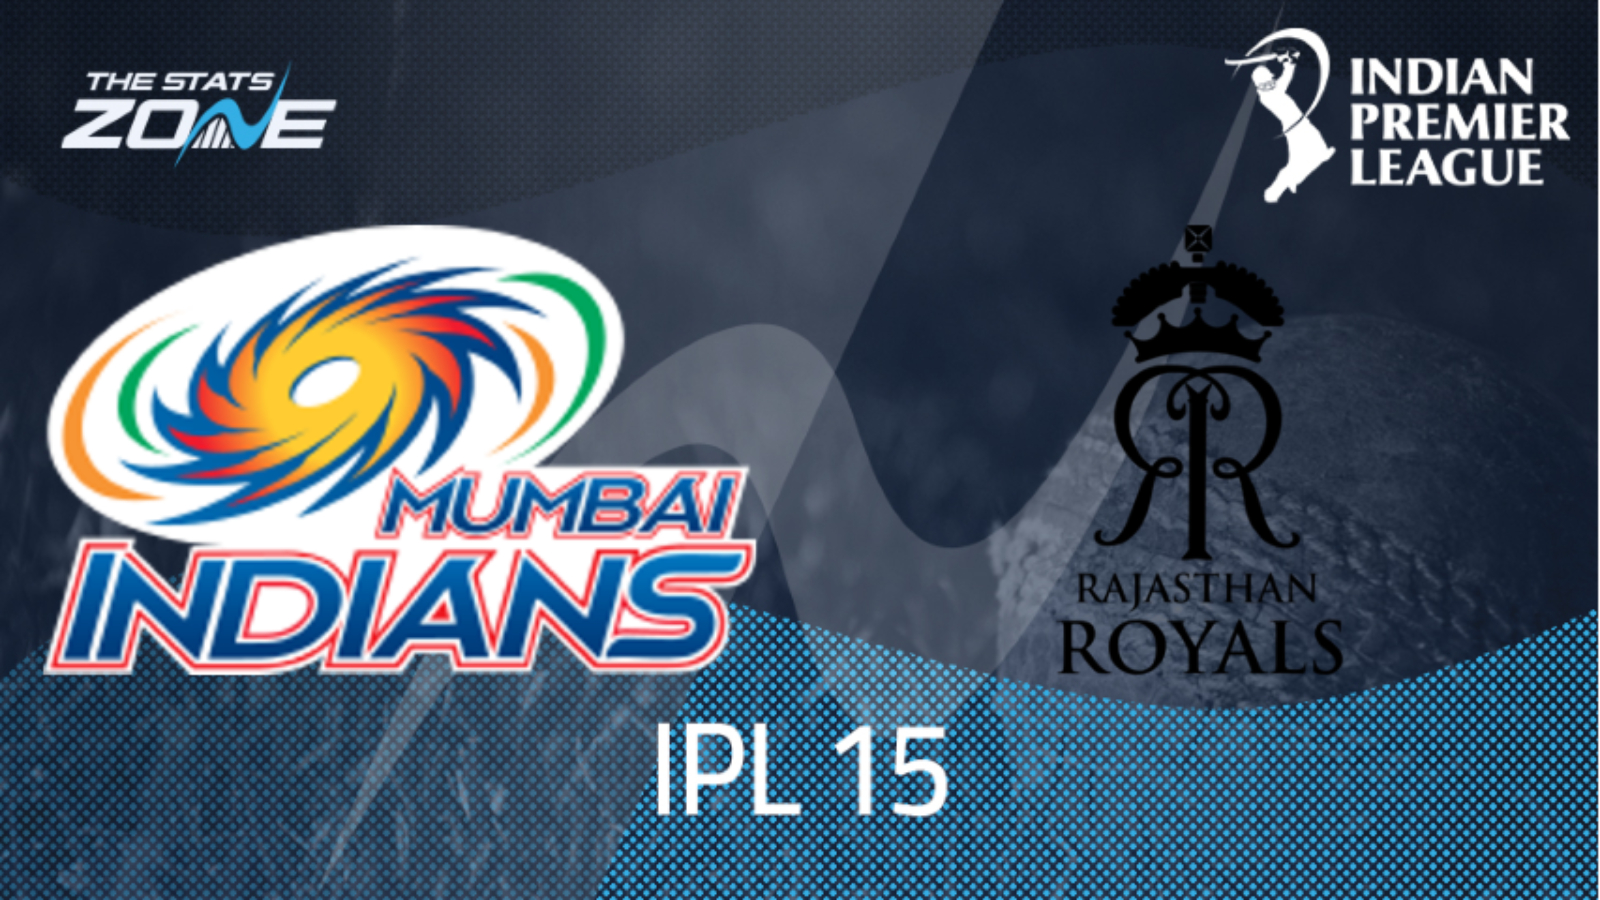 Mumbai Indians vs Rajasthan Royals Group Stage Preview & Prediction